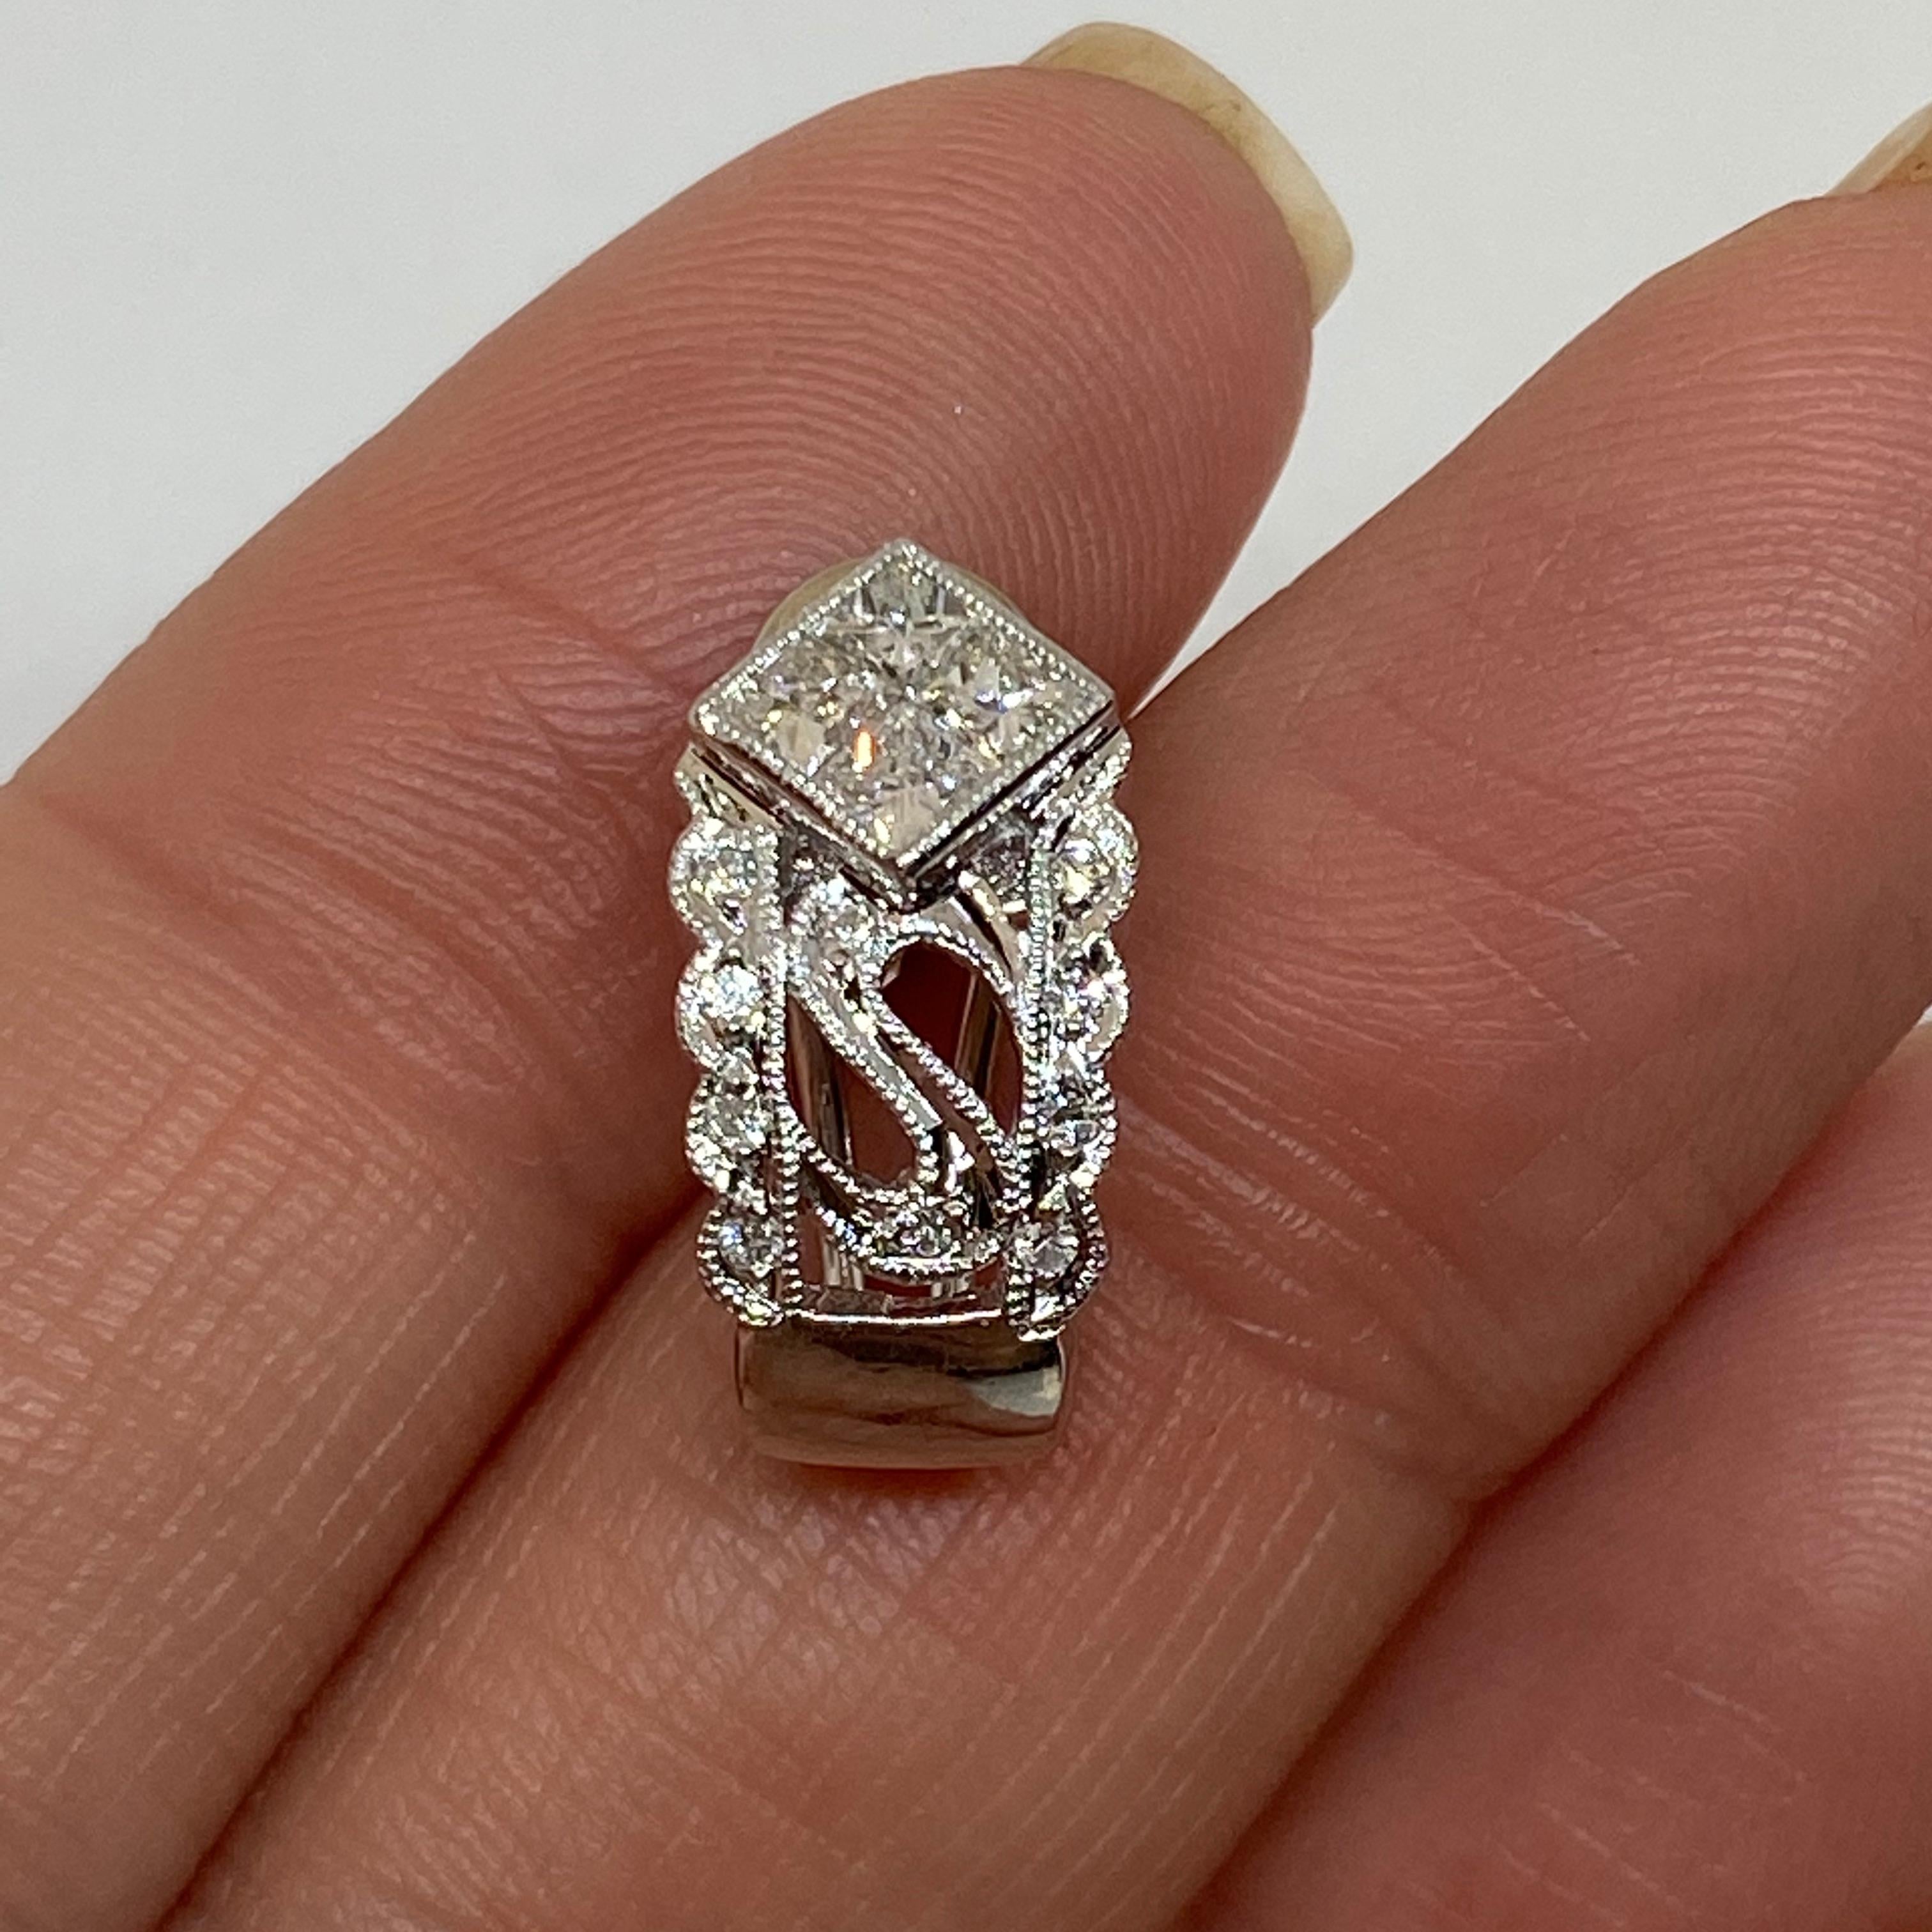 Estate Diamond Omega French Clip Huggie Earrings 14 Karat White Gold 1 Carat In Excellent Condition For Sale In Carmel-by-the-Sea, CA